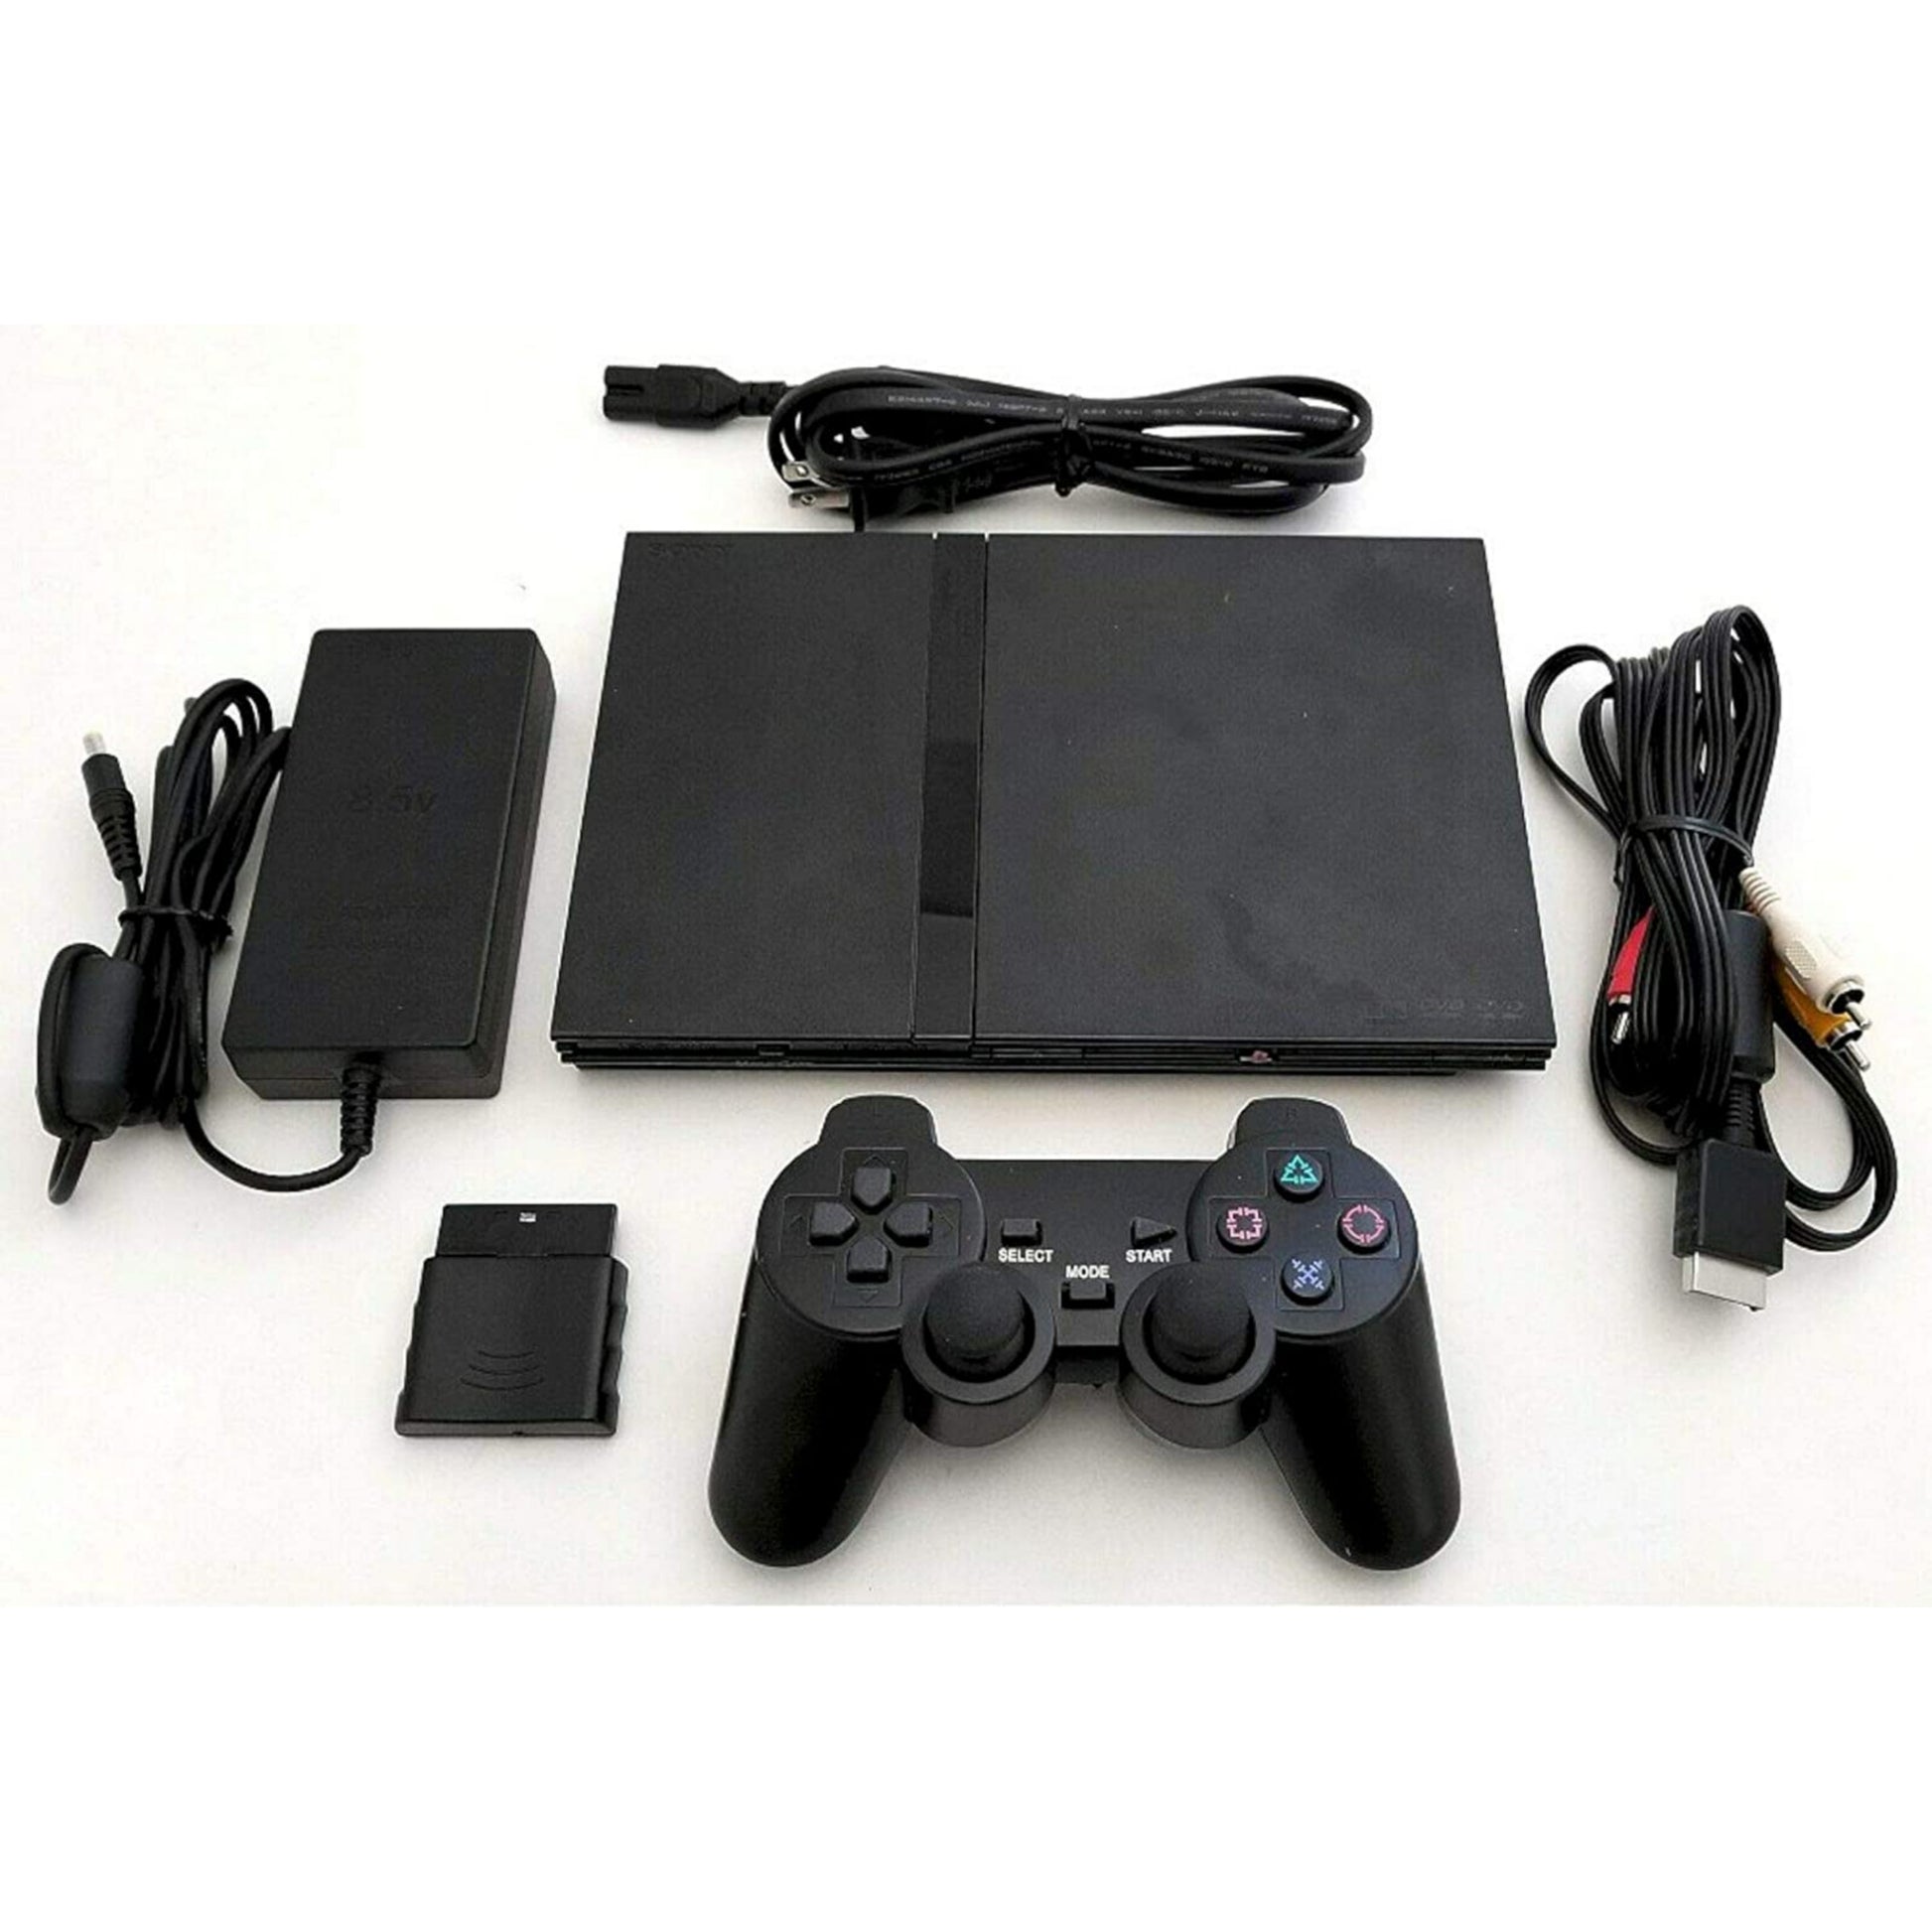 Sony Playstation 2 (PS2) Slim Game Console Complete Set with Wireless –  IFESOLOX